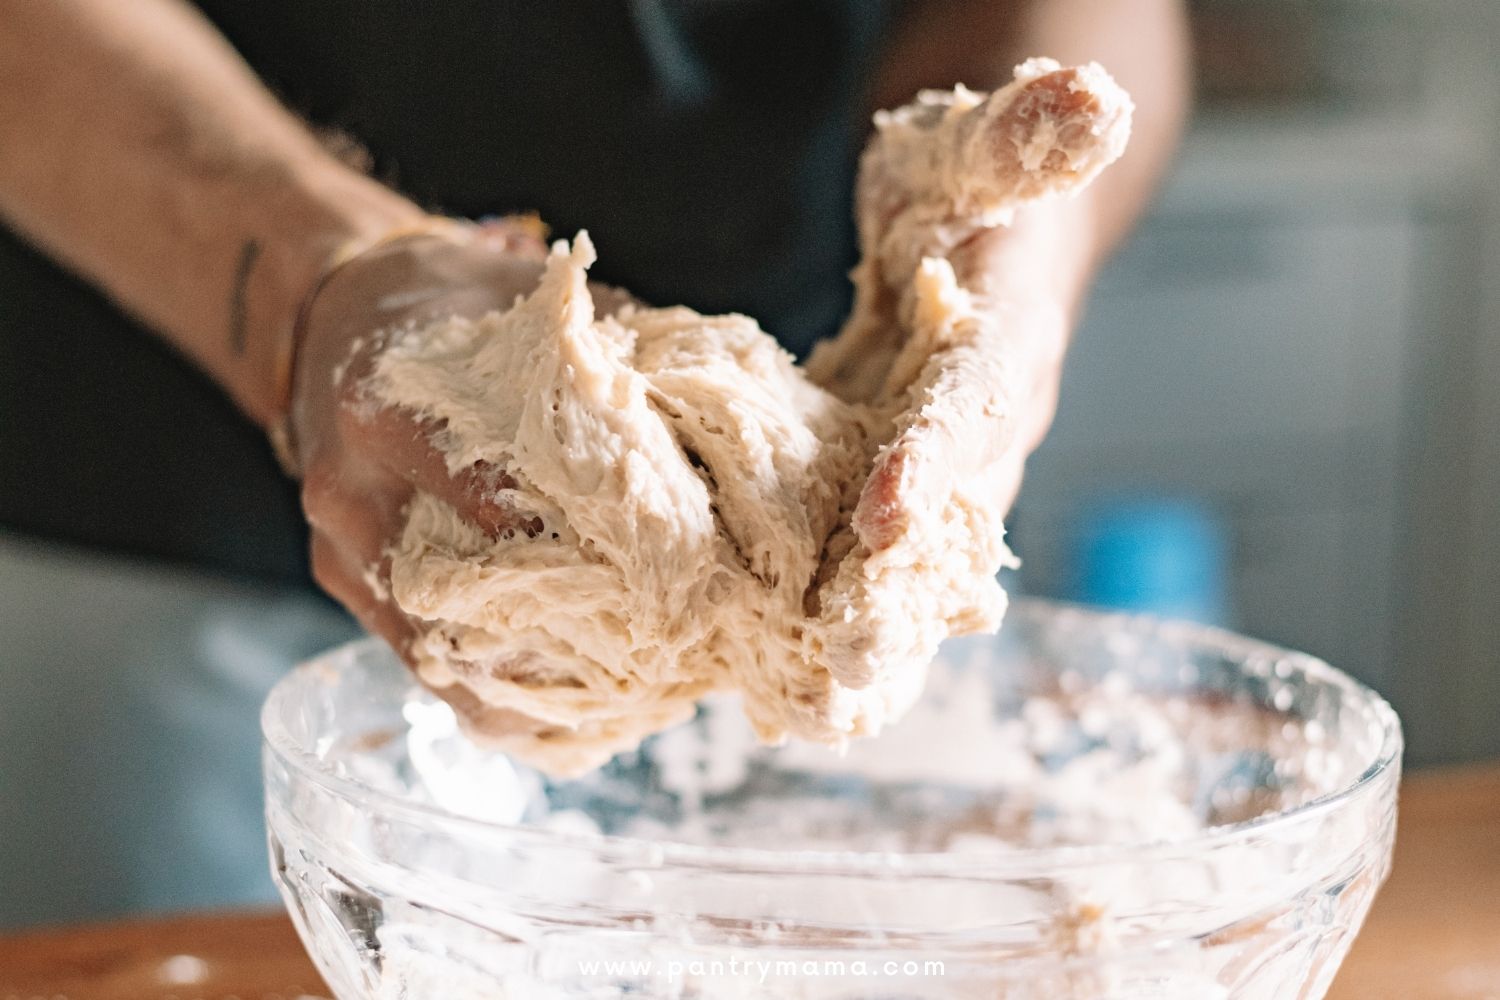 What Went Wrong With Your Sourdough?